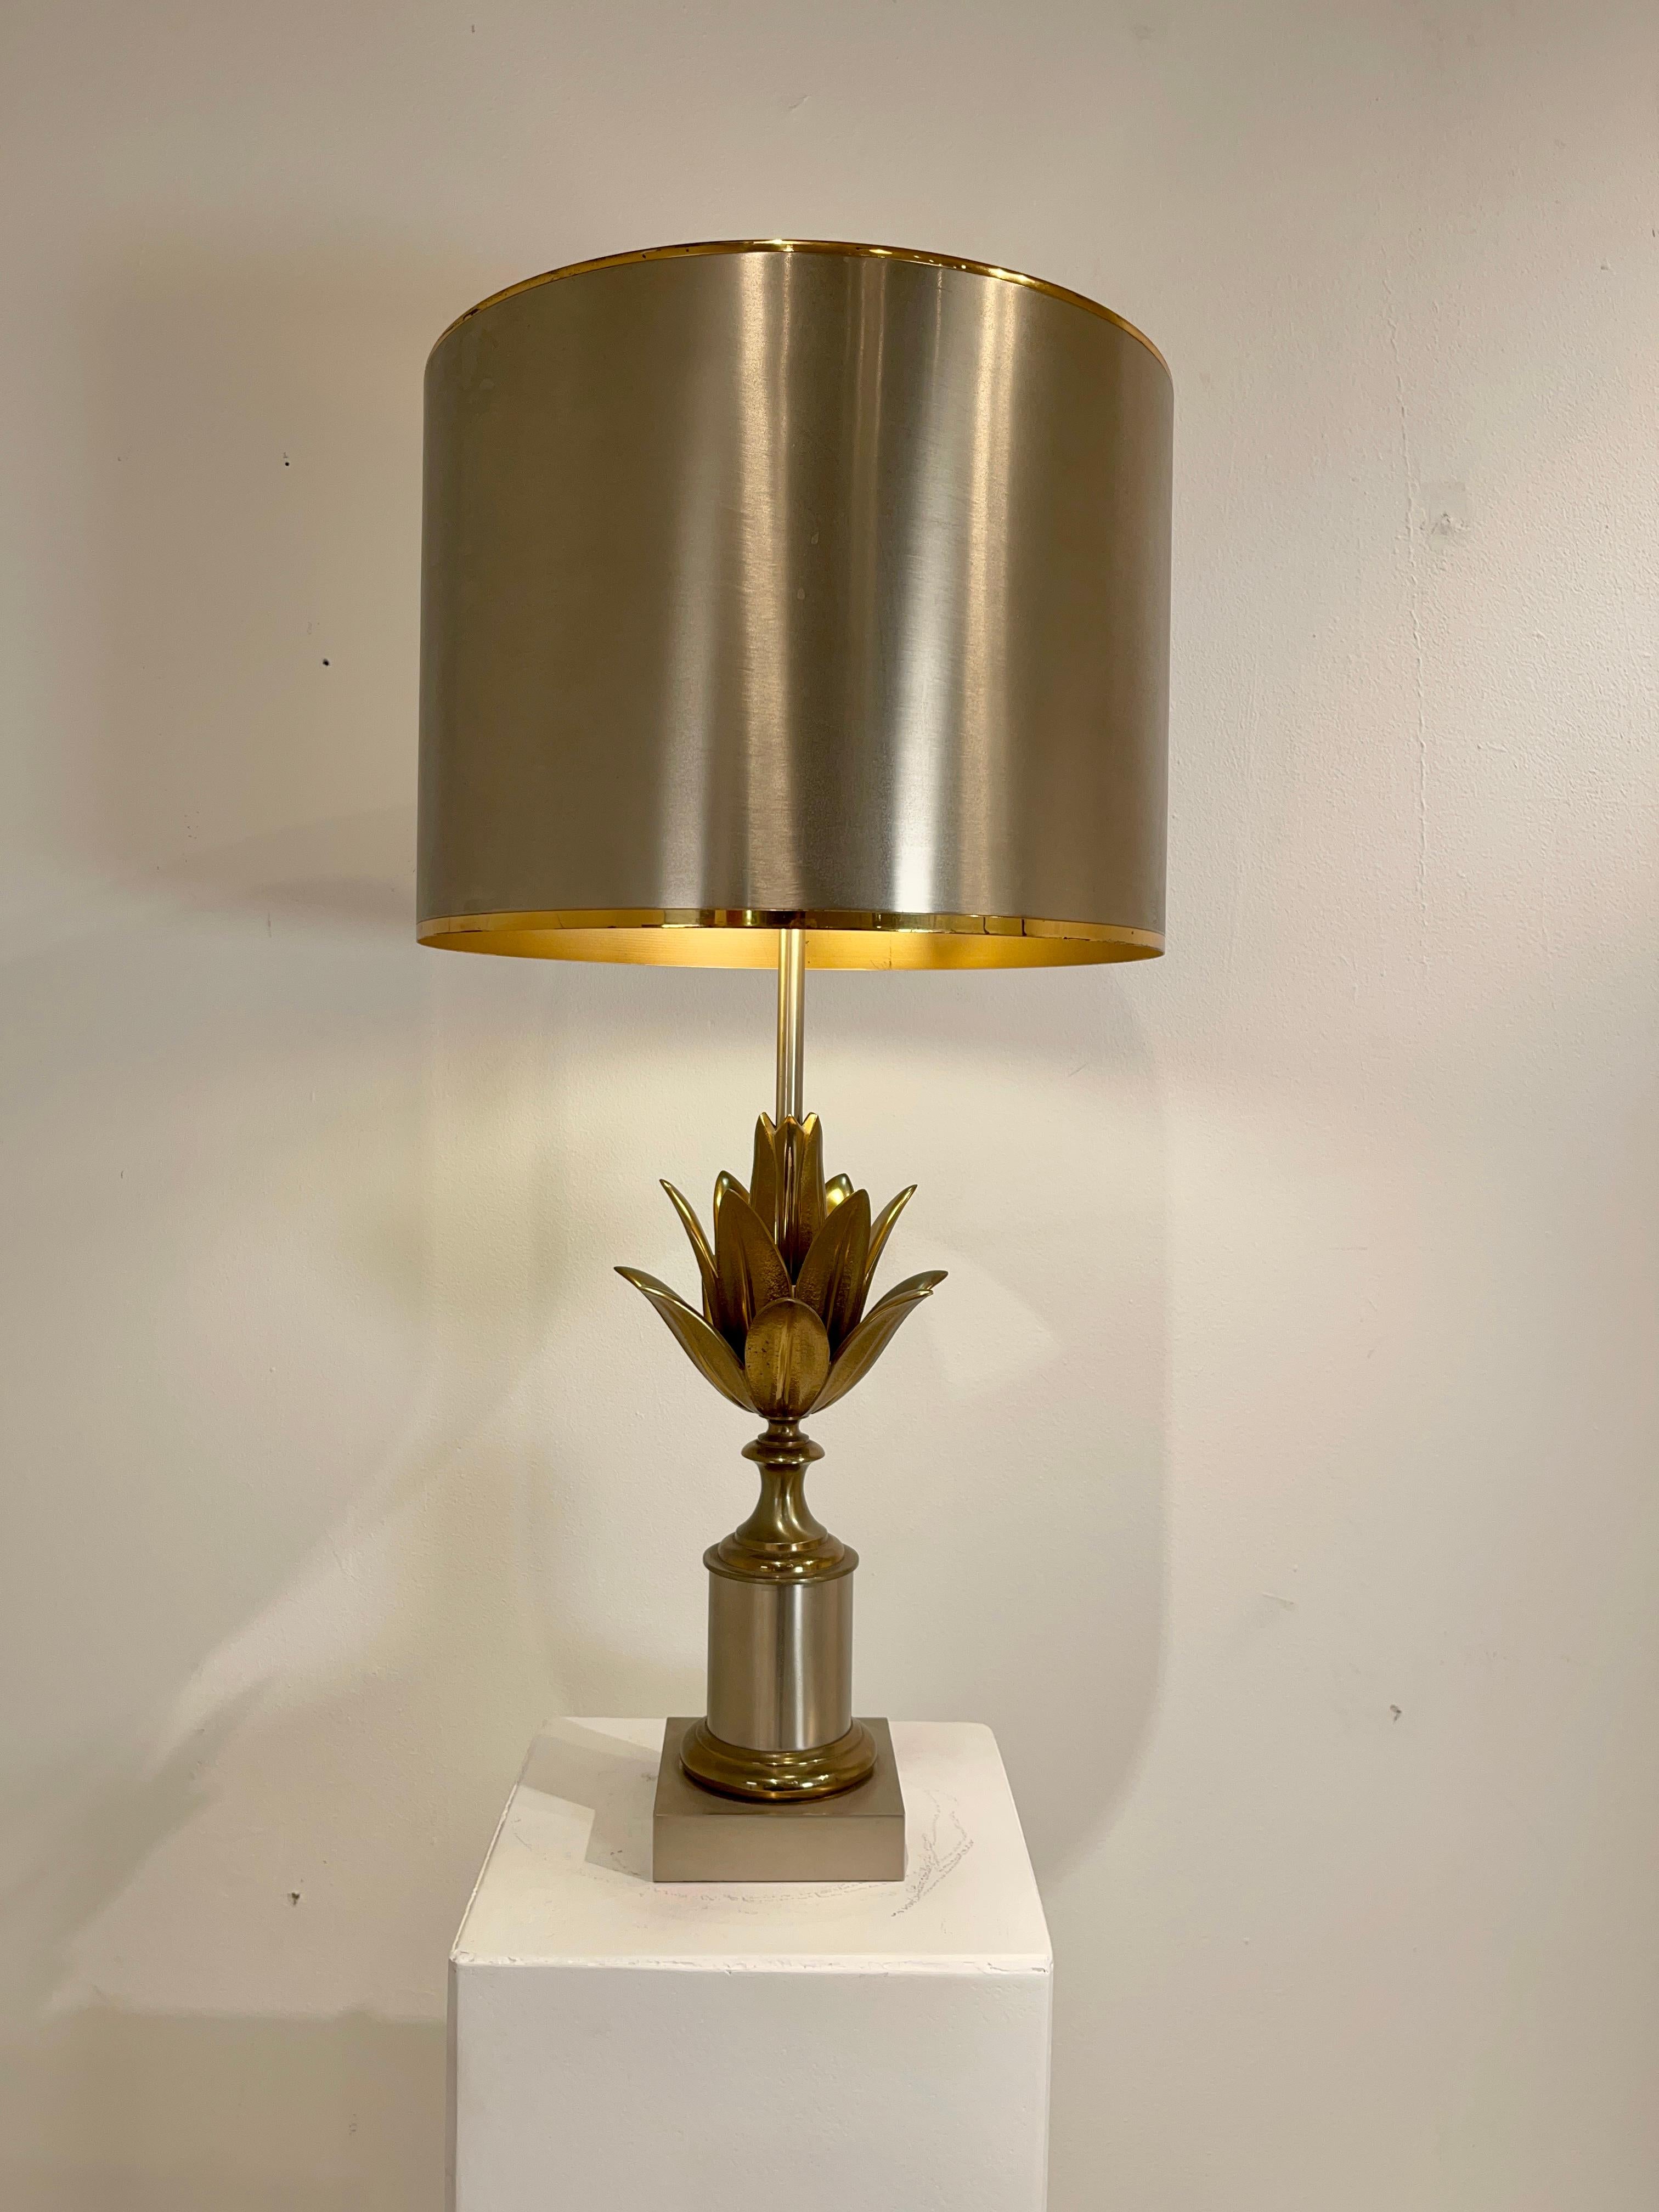 Table lamp by Maison Charles Model Lotus in original conditions, stamped on the base 